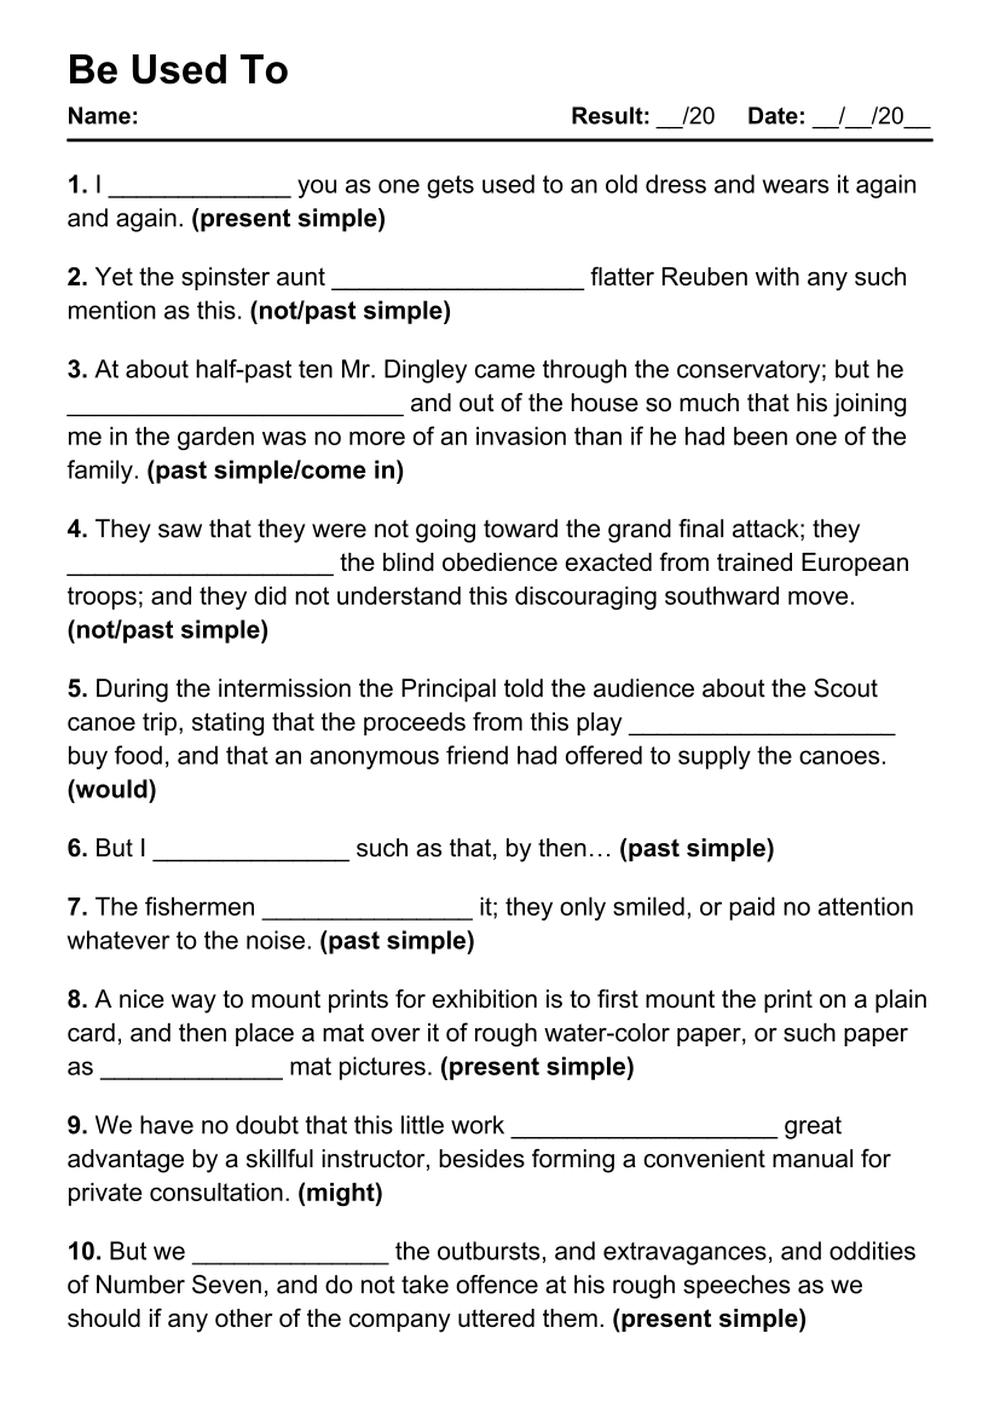 Printable Be Used To Exercises - PDF Worksheet with Answers - Test 10